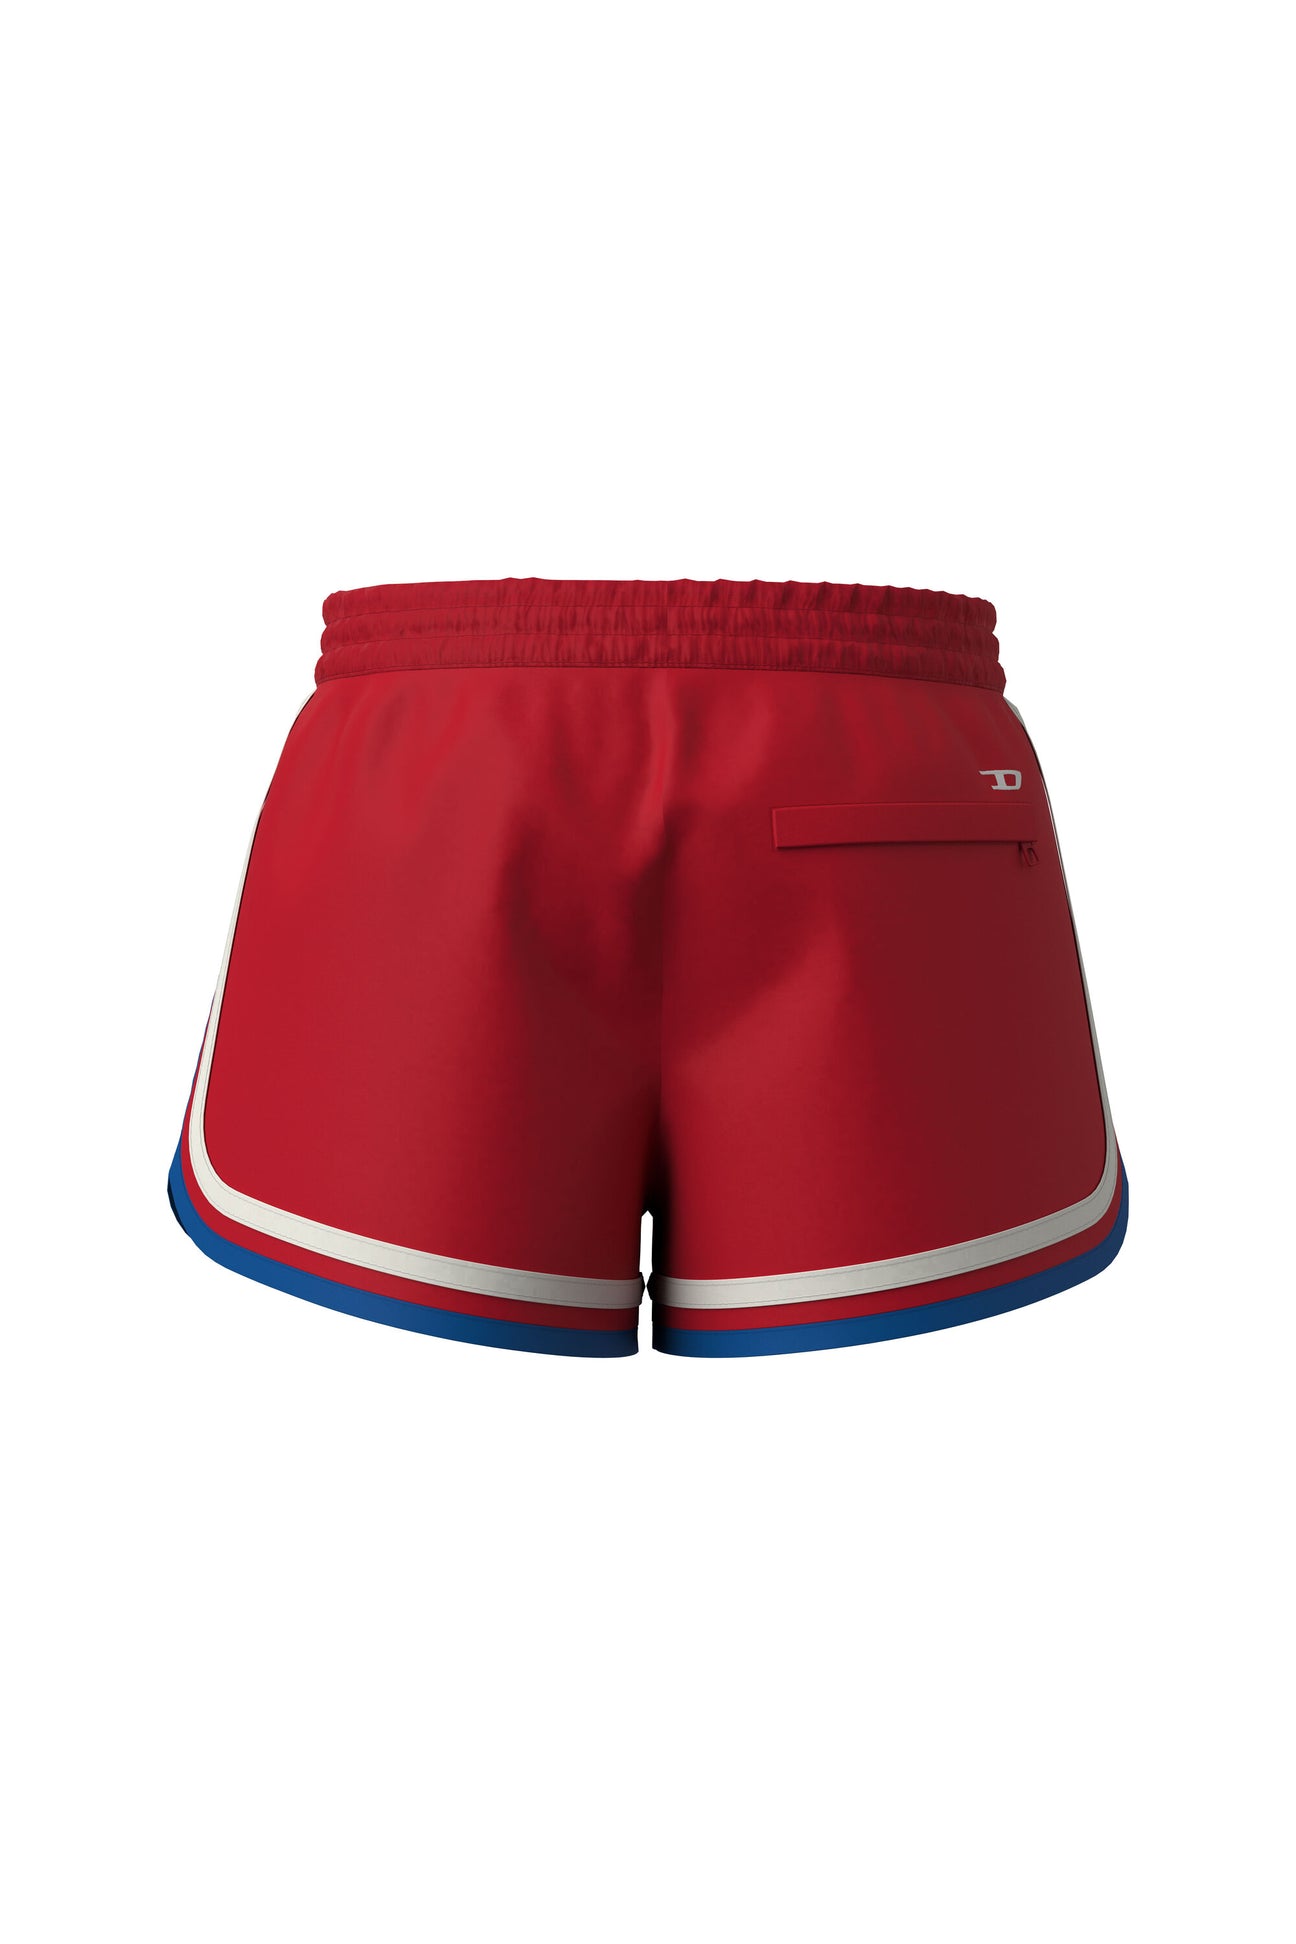 Red boxer shorts with logo Red boxer shorts with logo